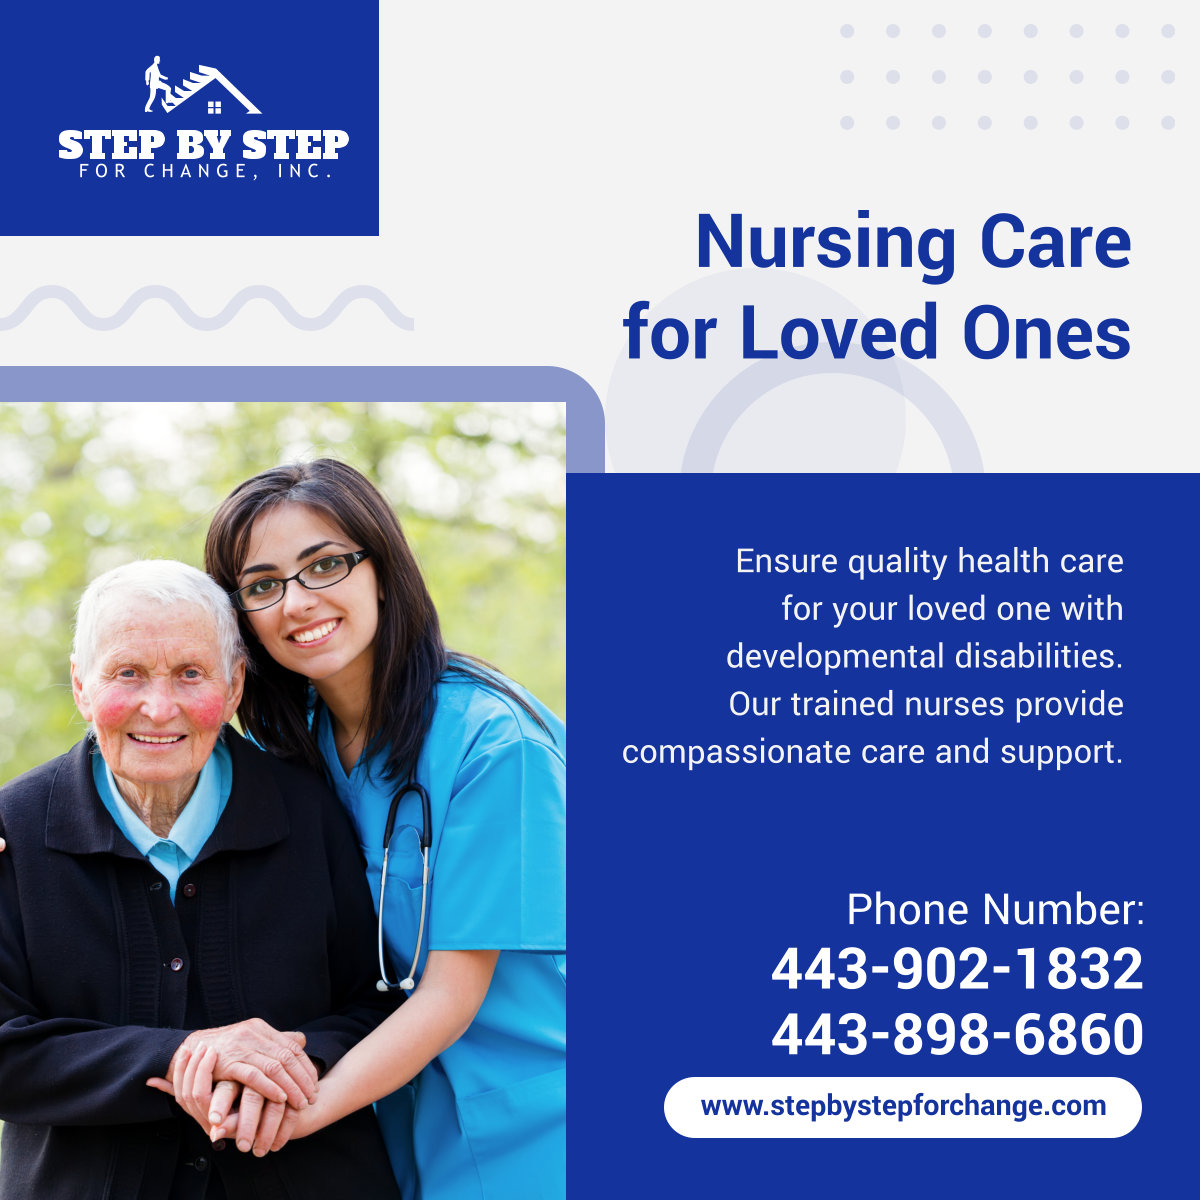 Trust our trained nurses to provide compassionate care and support for your loved one with developmental disabilities. Quality healthcare is our priority. 

#OwingsMillsMD #ResidentialCareServices #NursingCare